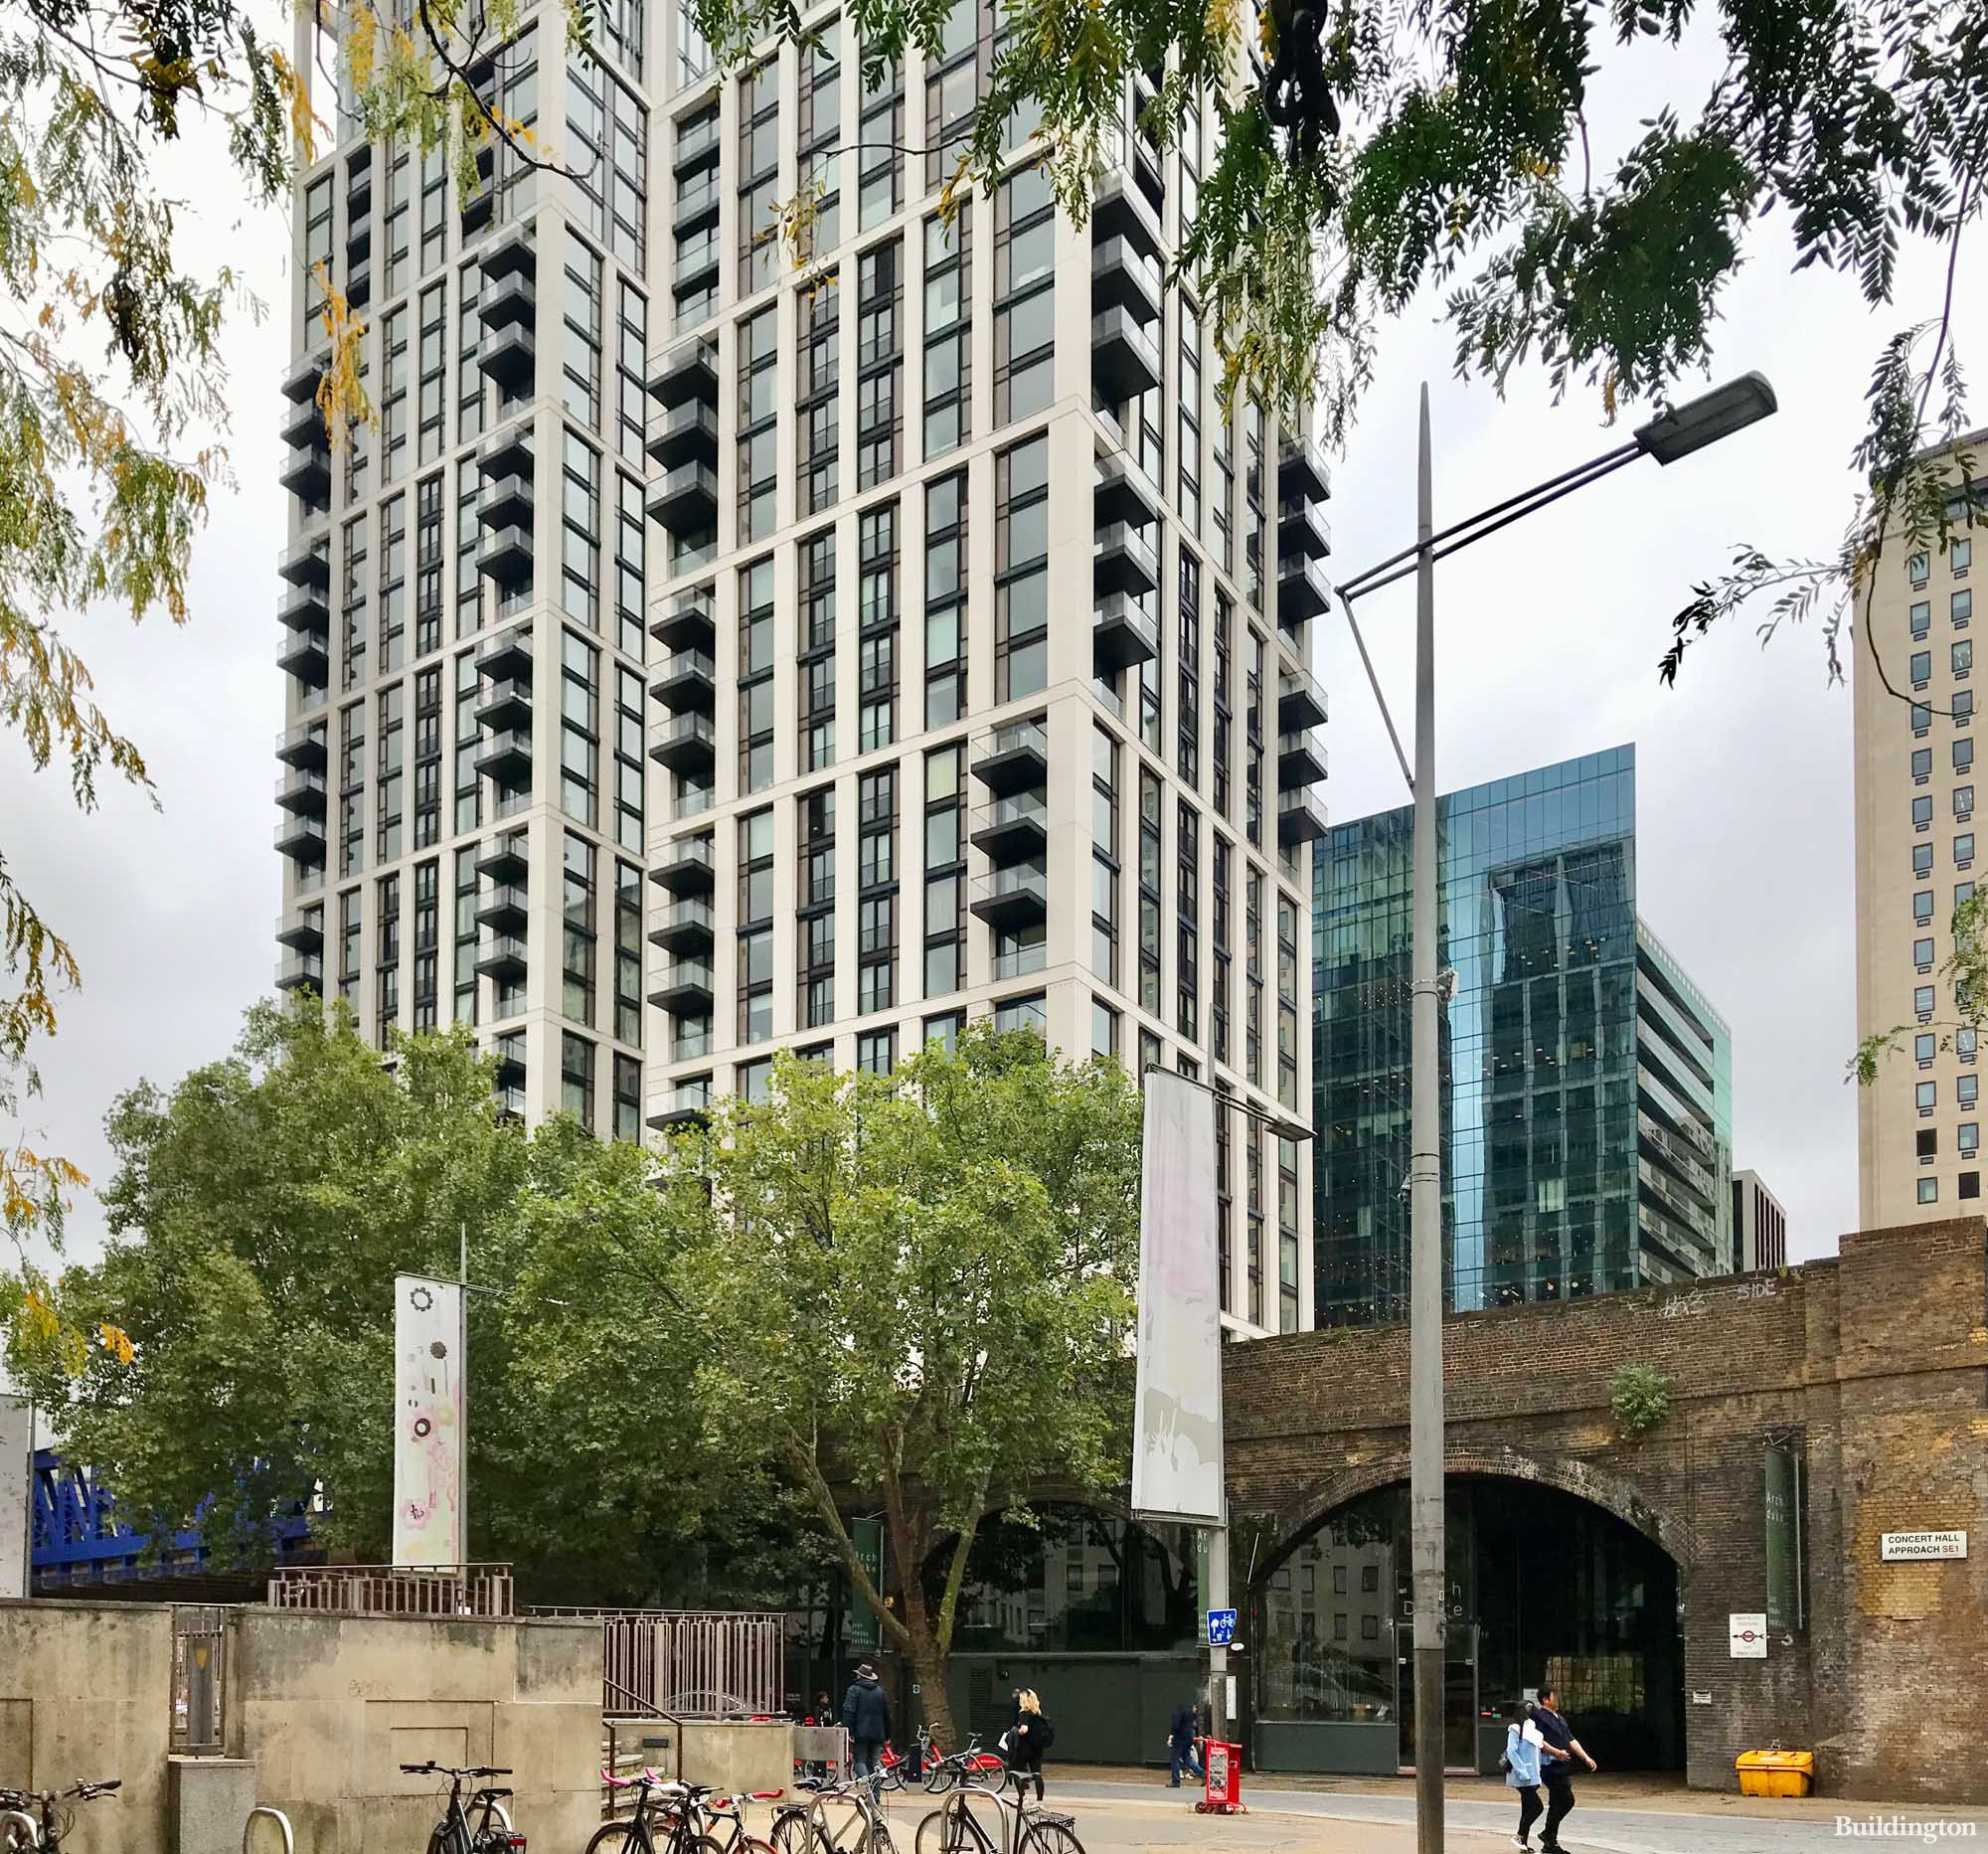 29-storey Thirty Casson Square building at Southbank Place development designed by Squire & Partners. View from Belvedere Road.